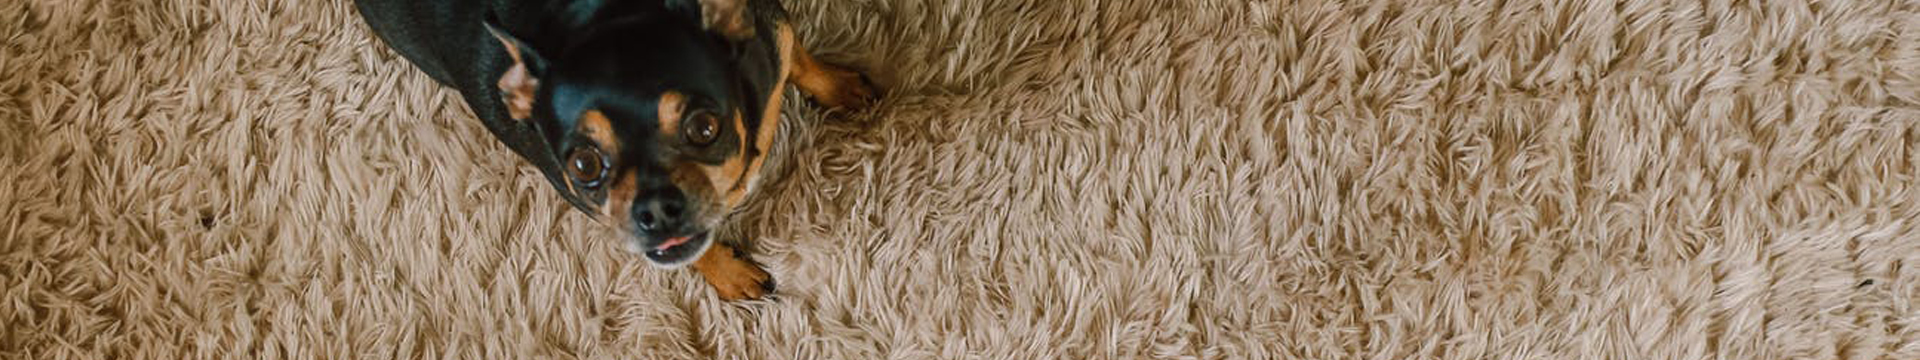 Most Powerful Ways To Clean Stains on Carpet